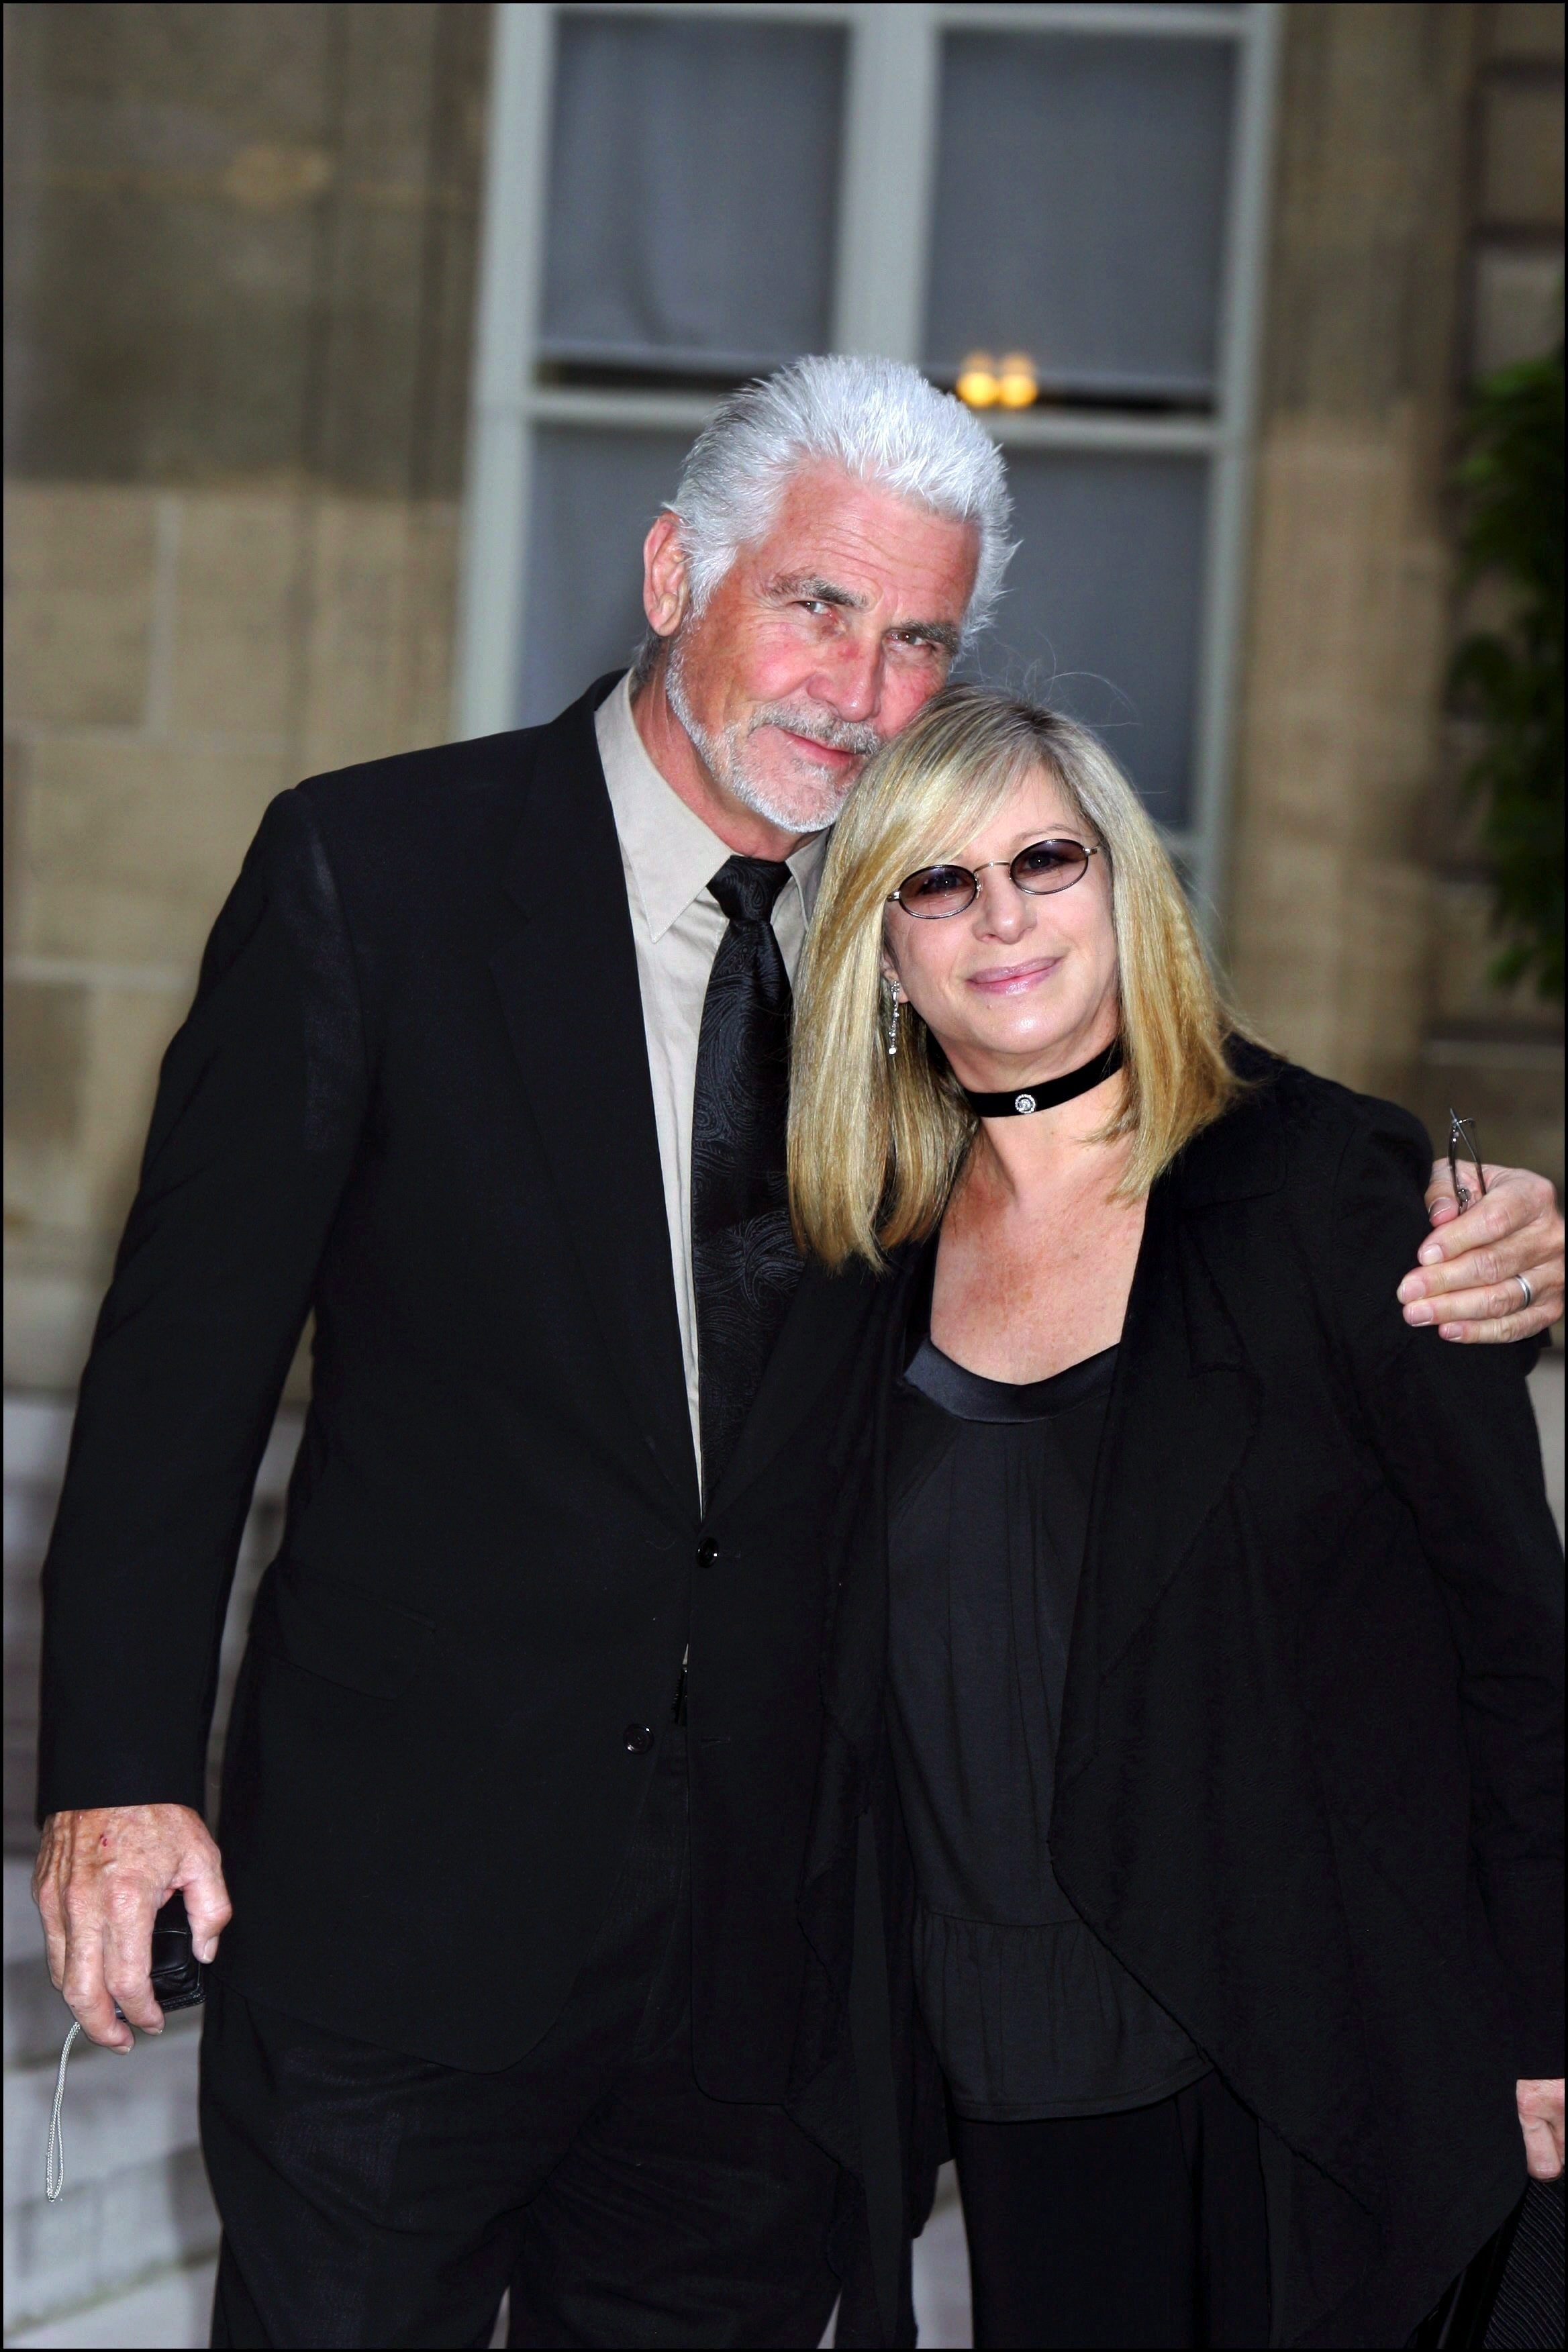 Barbra Streisand and husband James Brolin at the Elysee Palace in Paris, France, on June 28, 2007 | Source: Getty Images